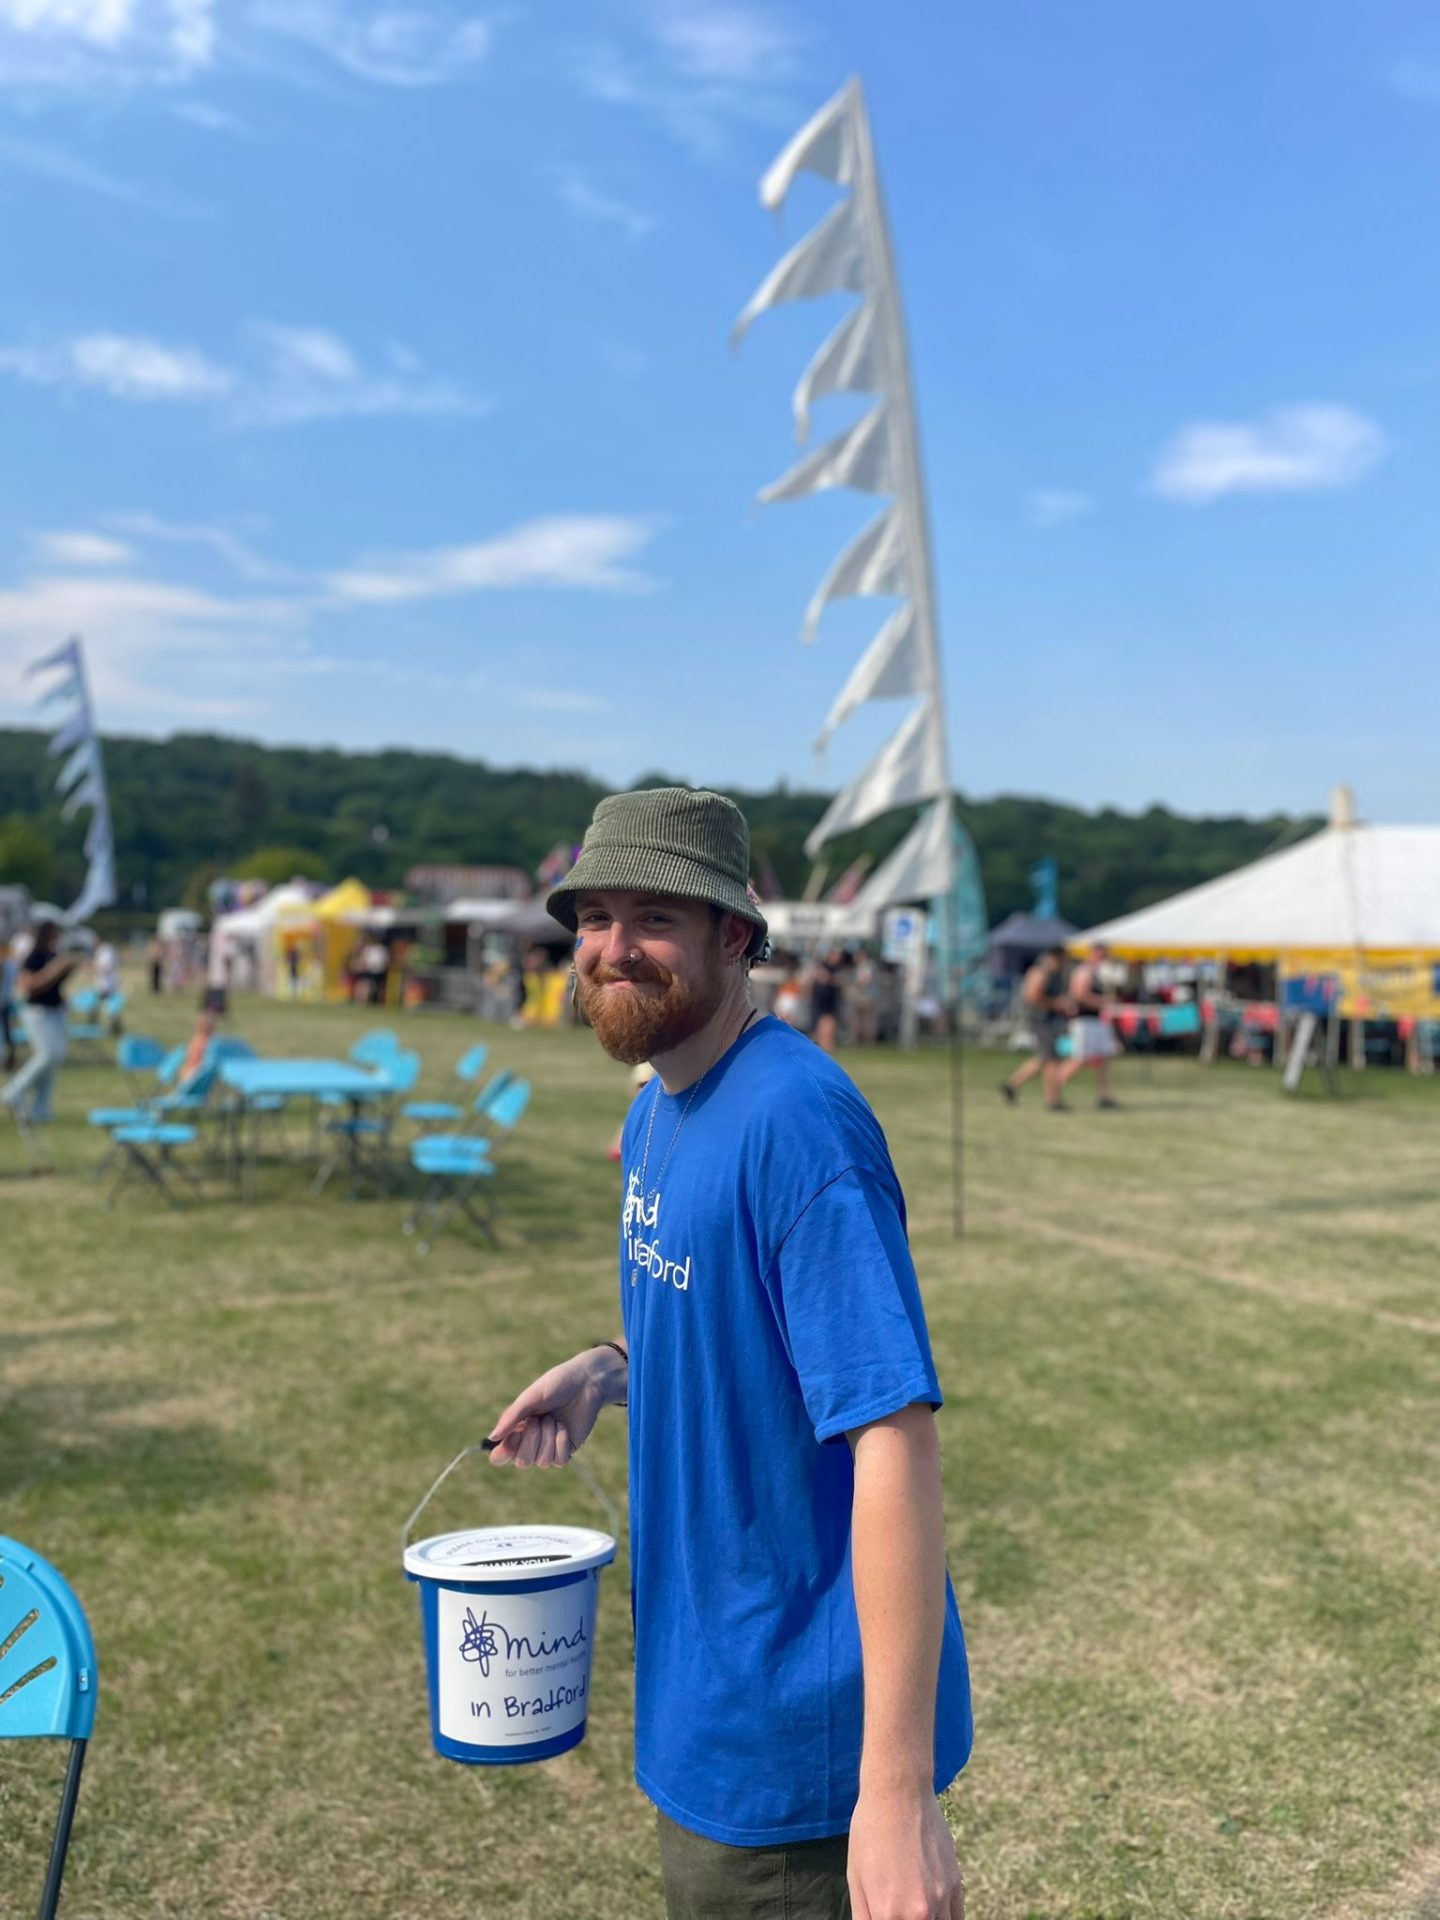 Smiling man in blue top holding a fundraising bucket